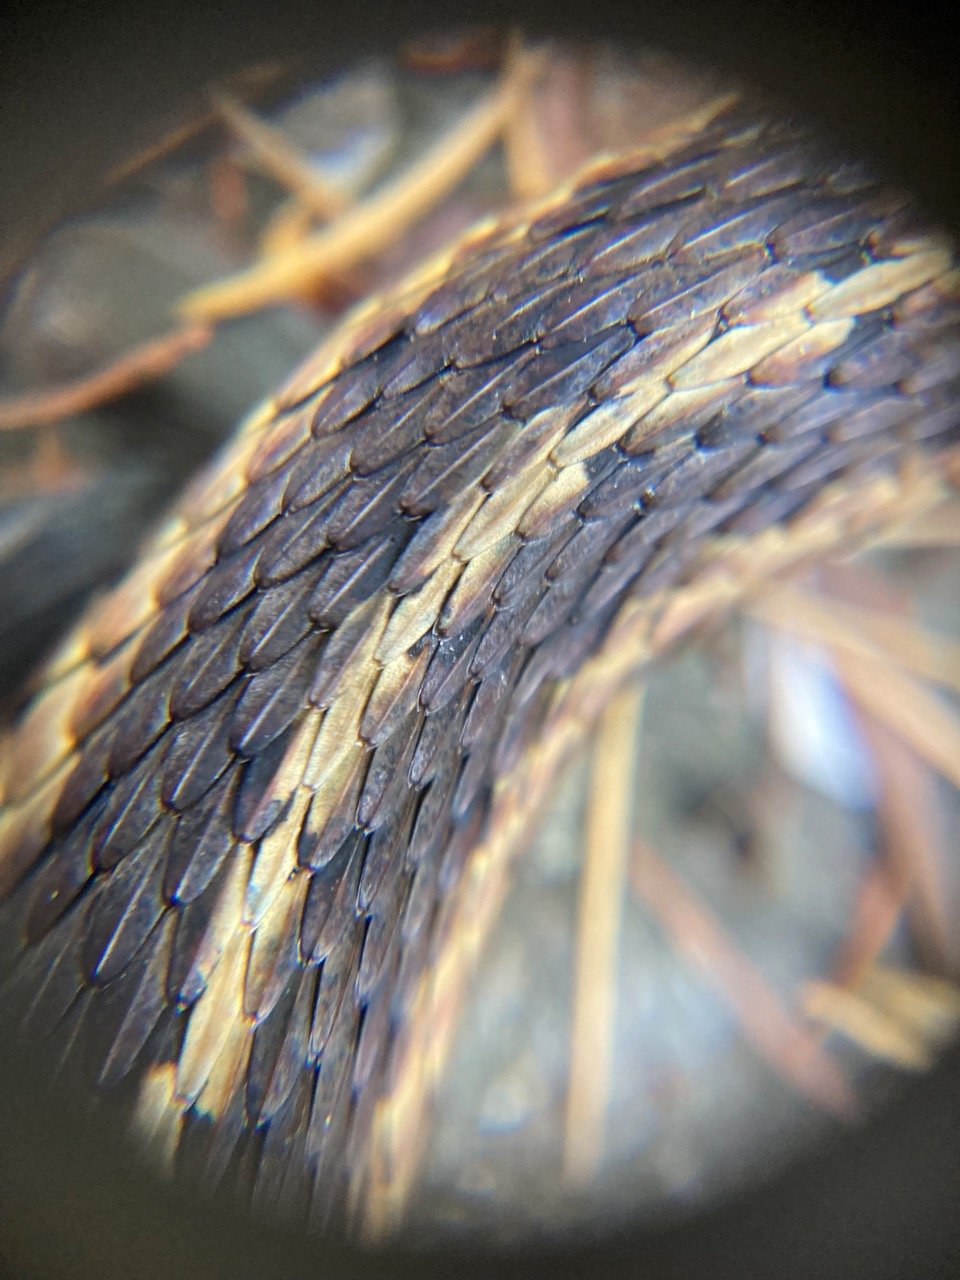 A close-up view of the beautiful keeled scales of an Eastern garter snake’s “skin.”